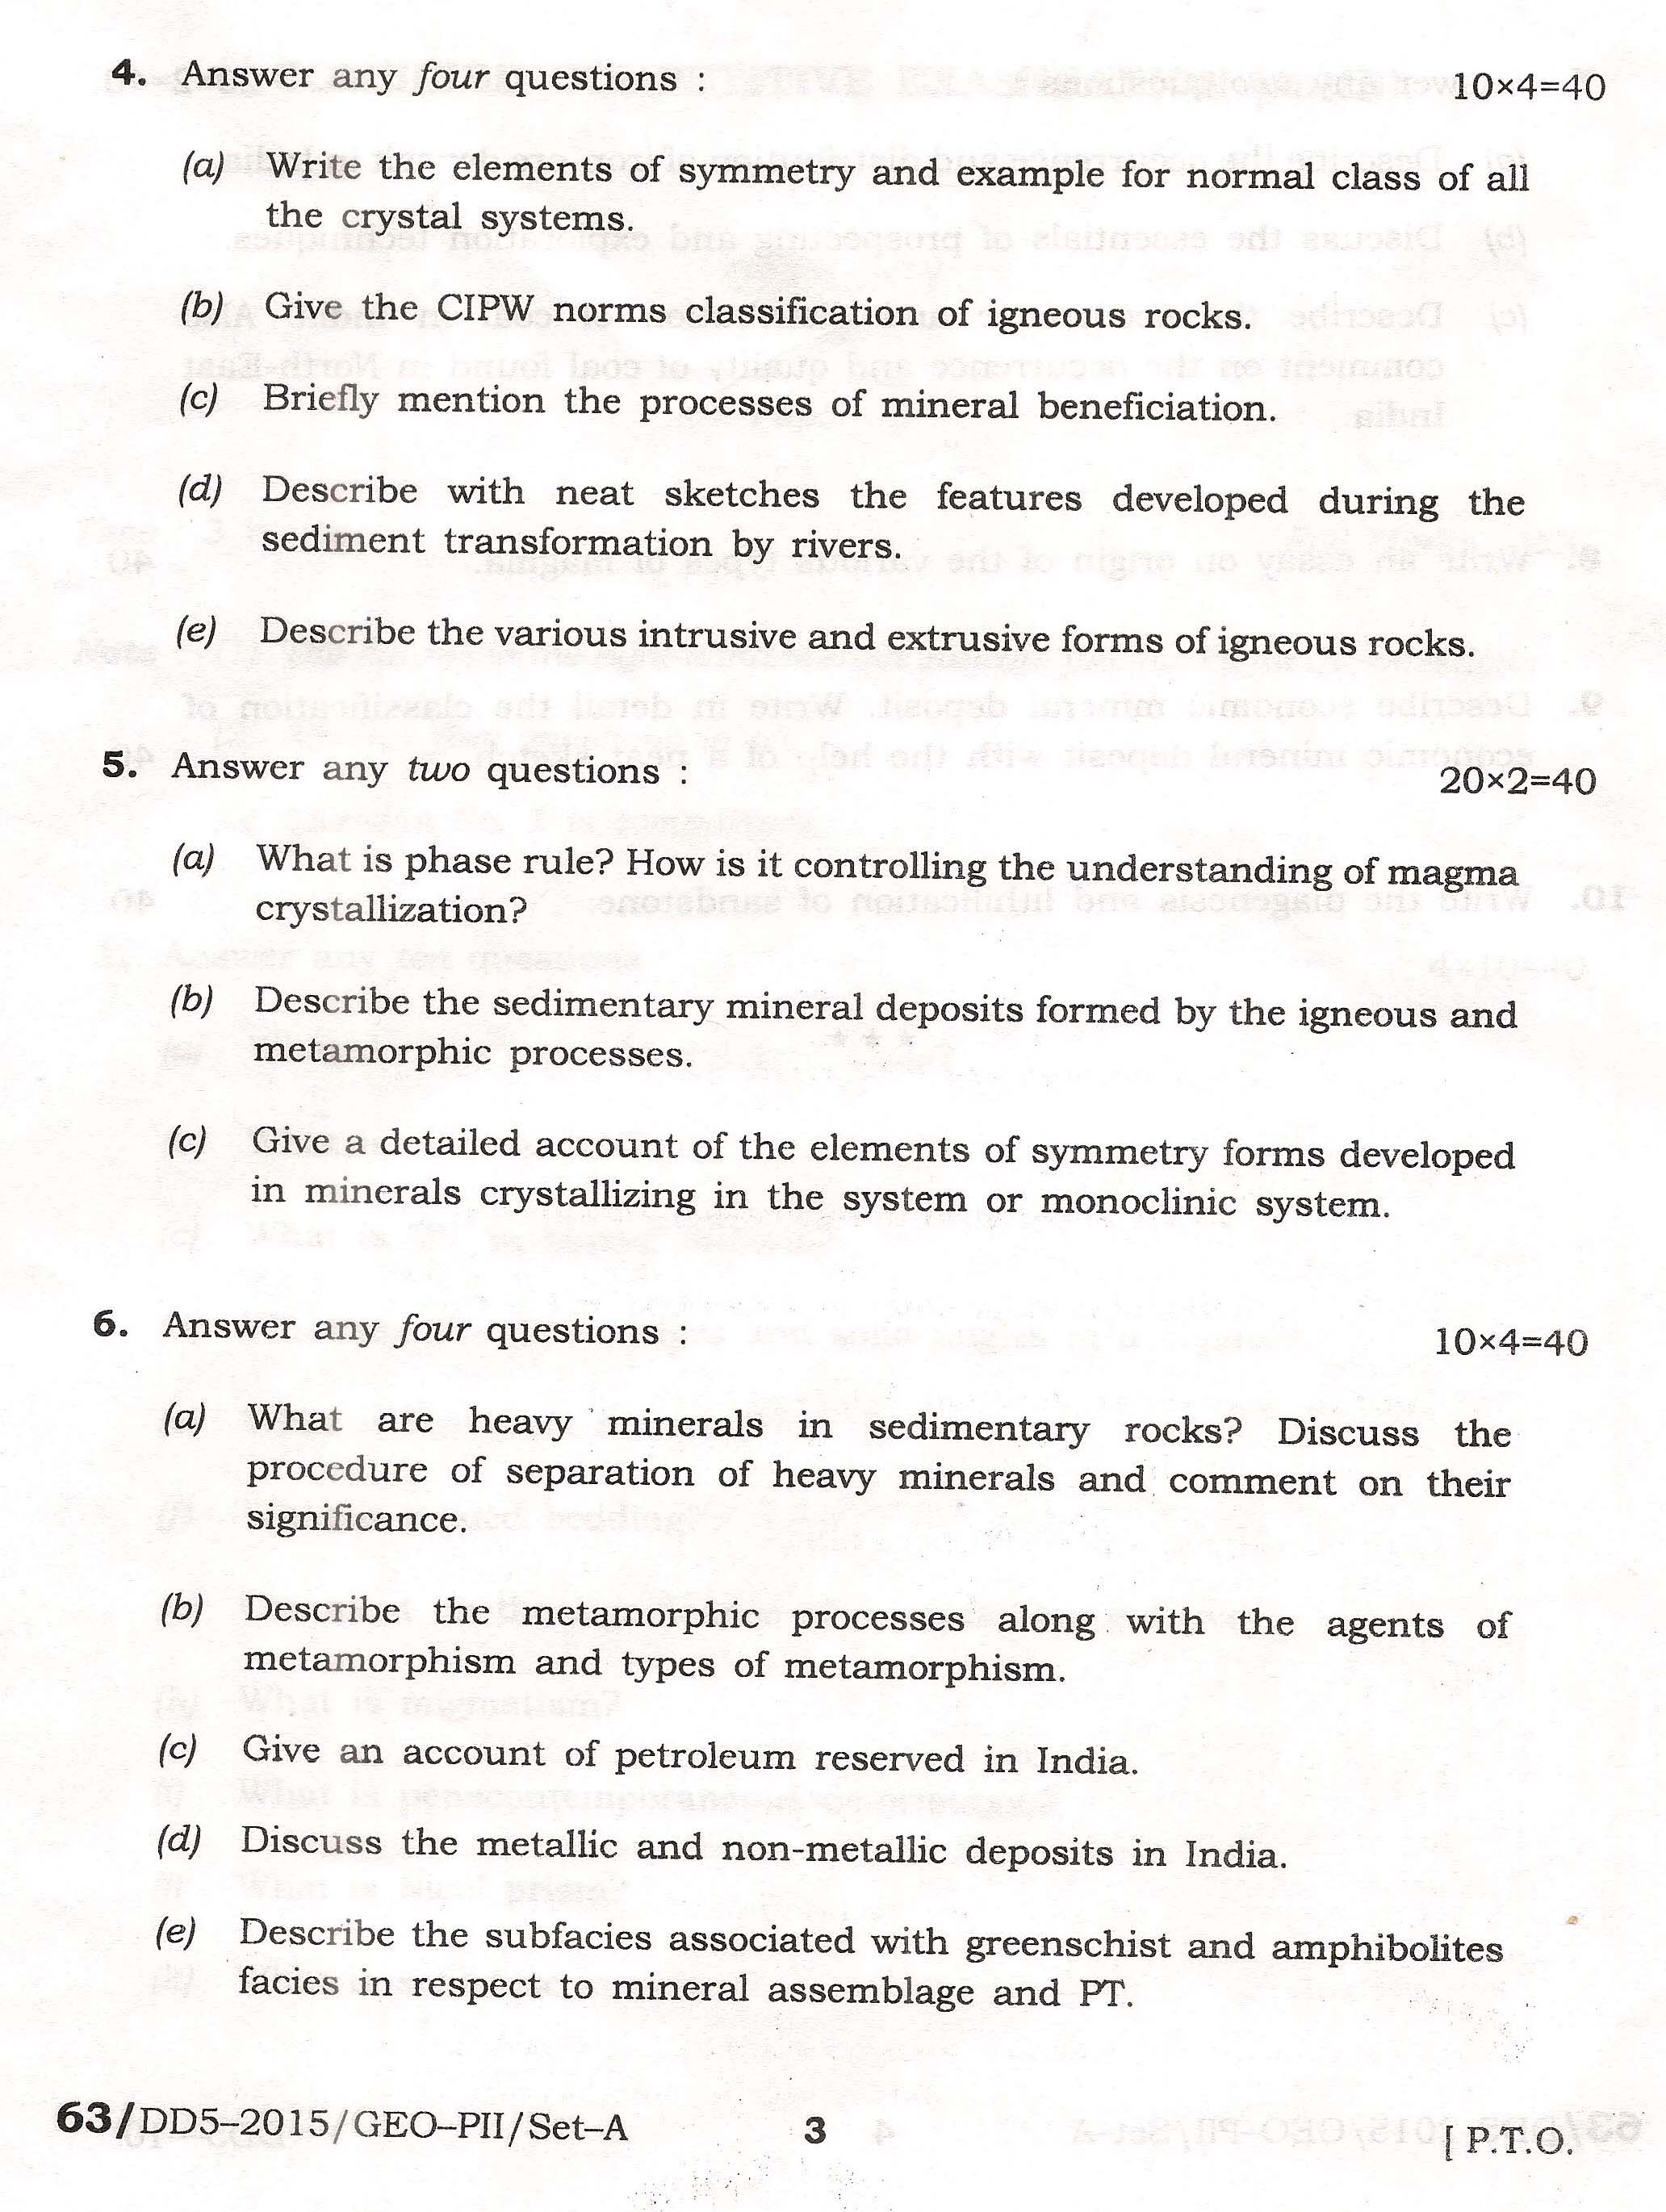 APPSC Combined Competitive Main Exam 2015 Geology Paper II 3